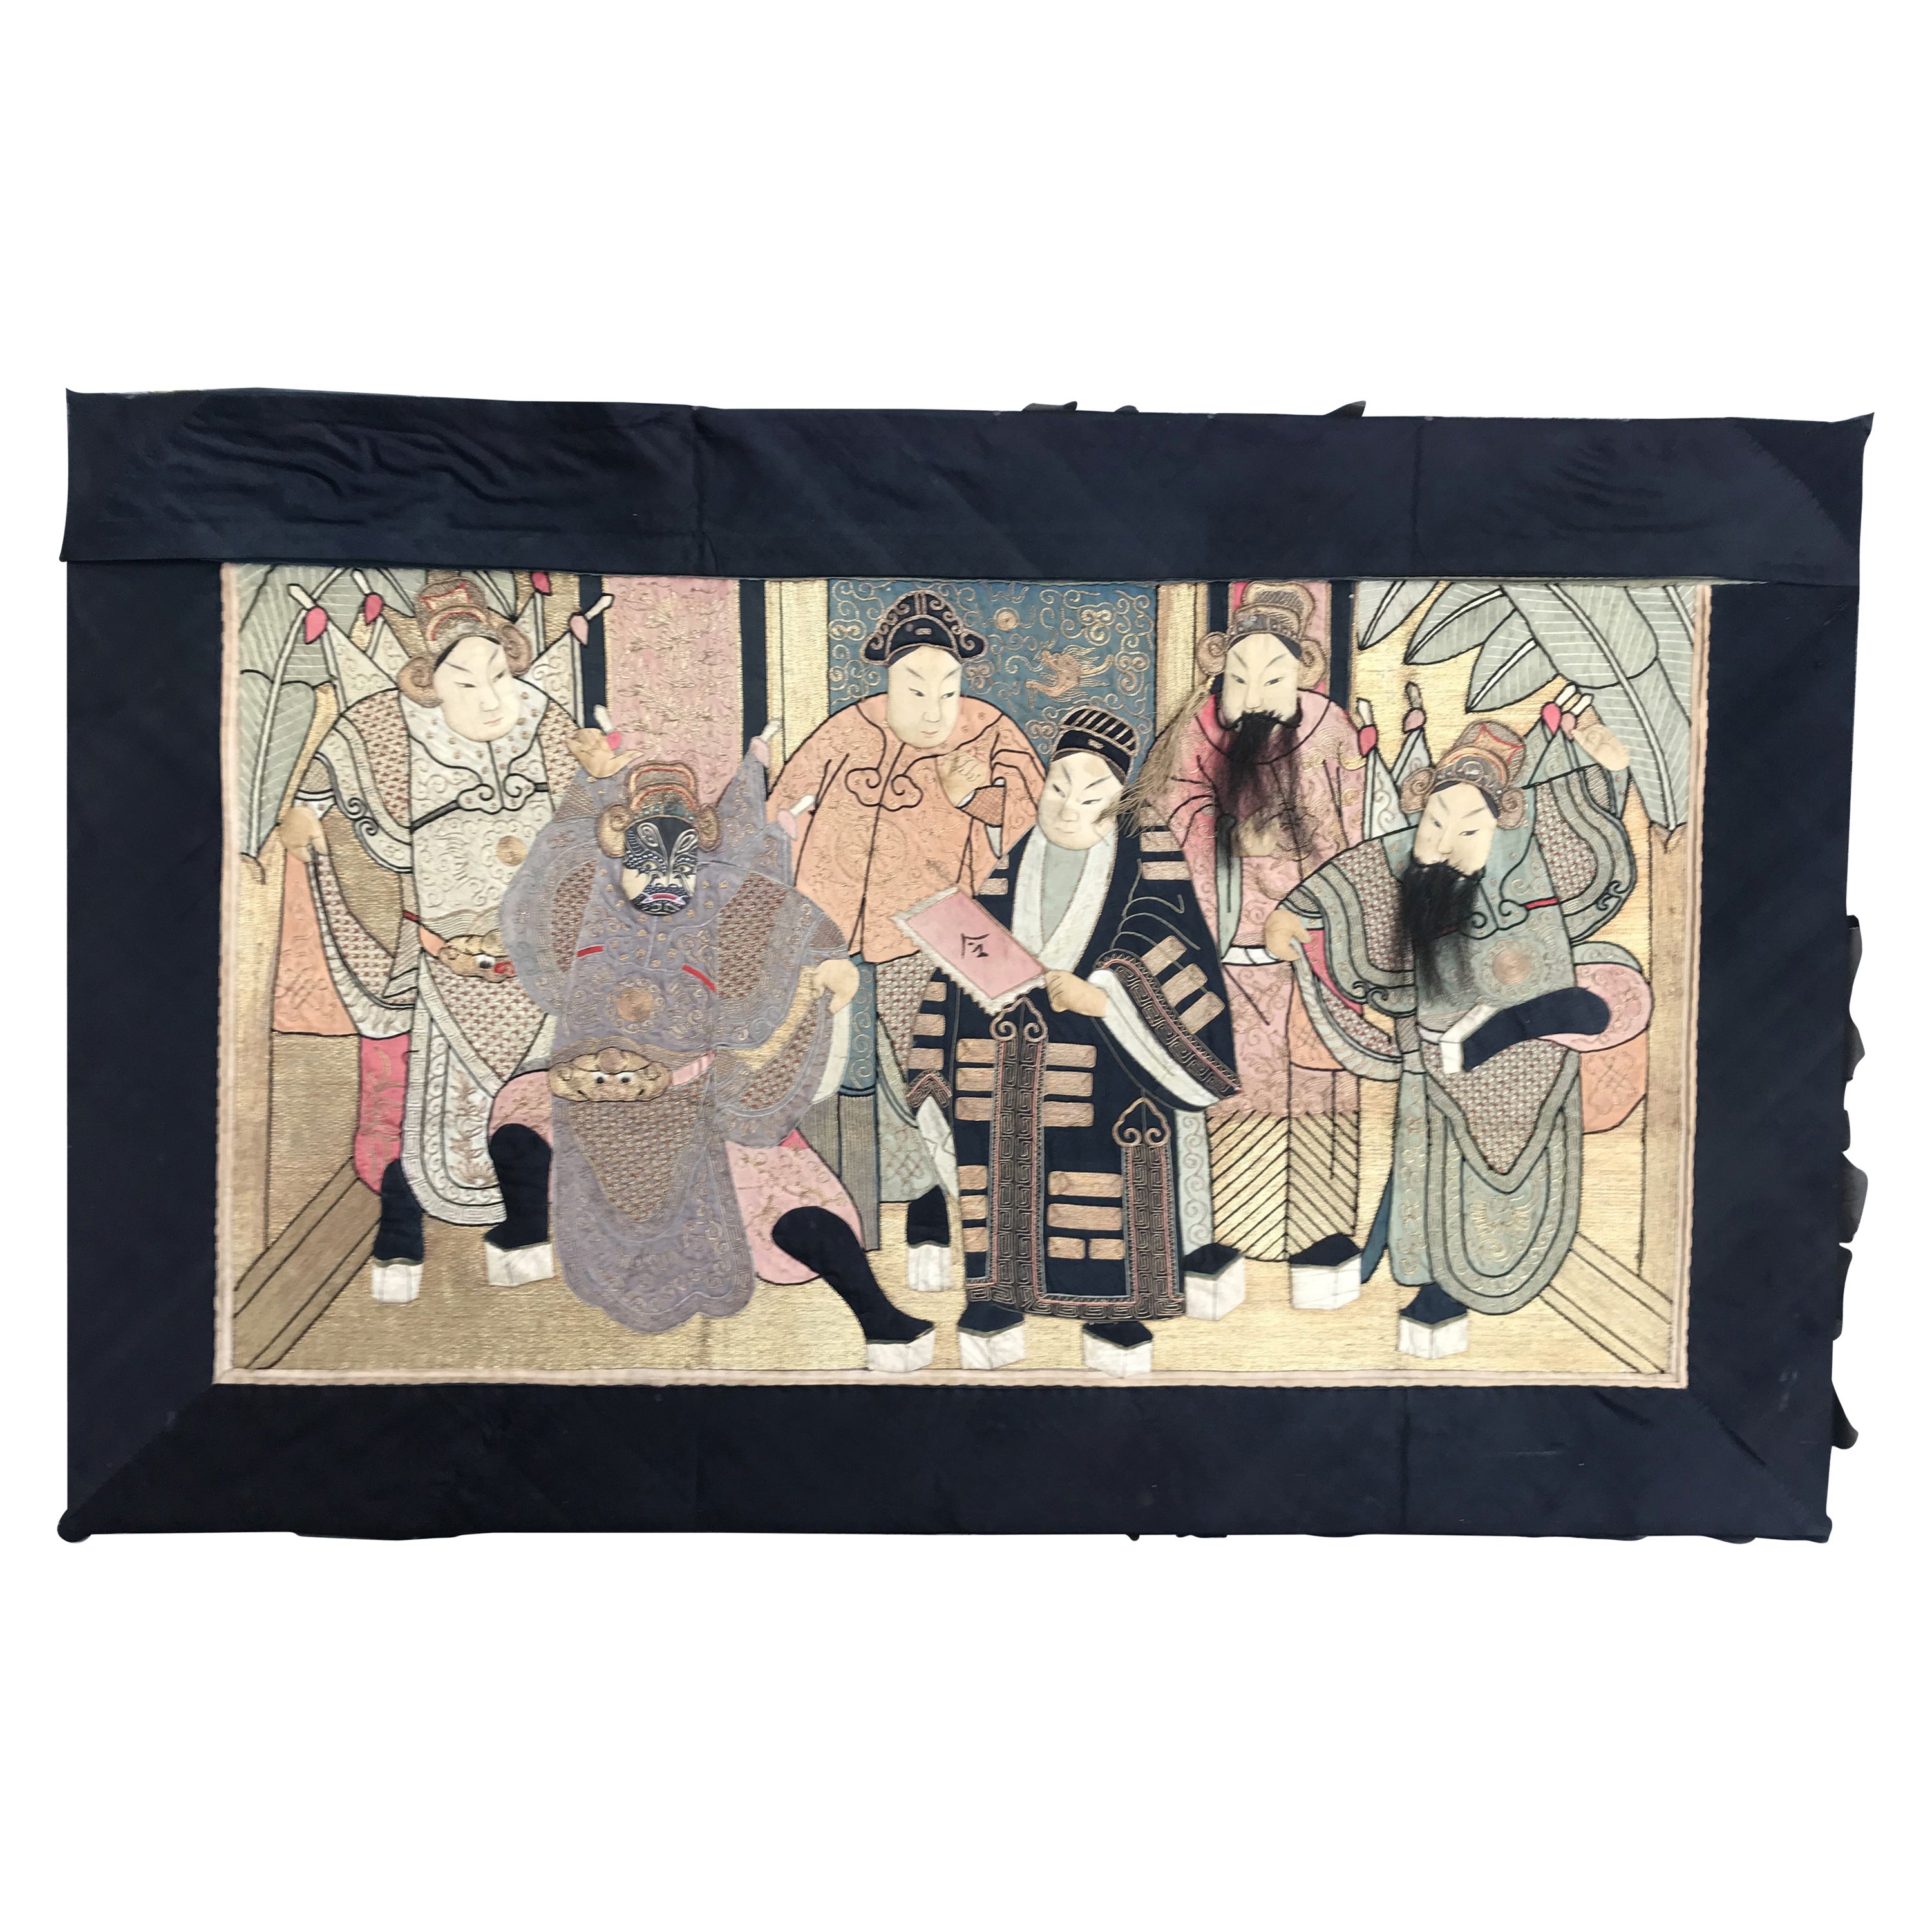 Bobyrug’s Wonderful Antique Chinese Pictural Embroidery with Silk and Metal For Sale